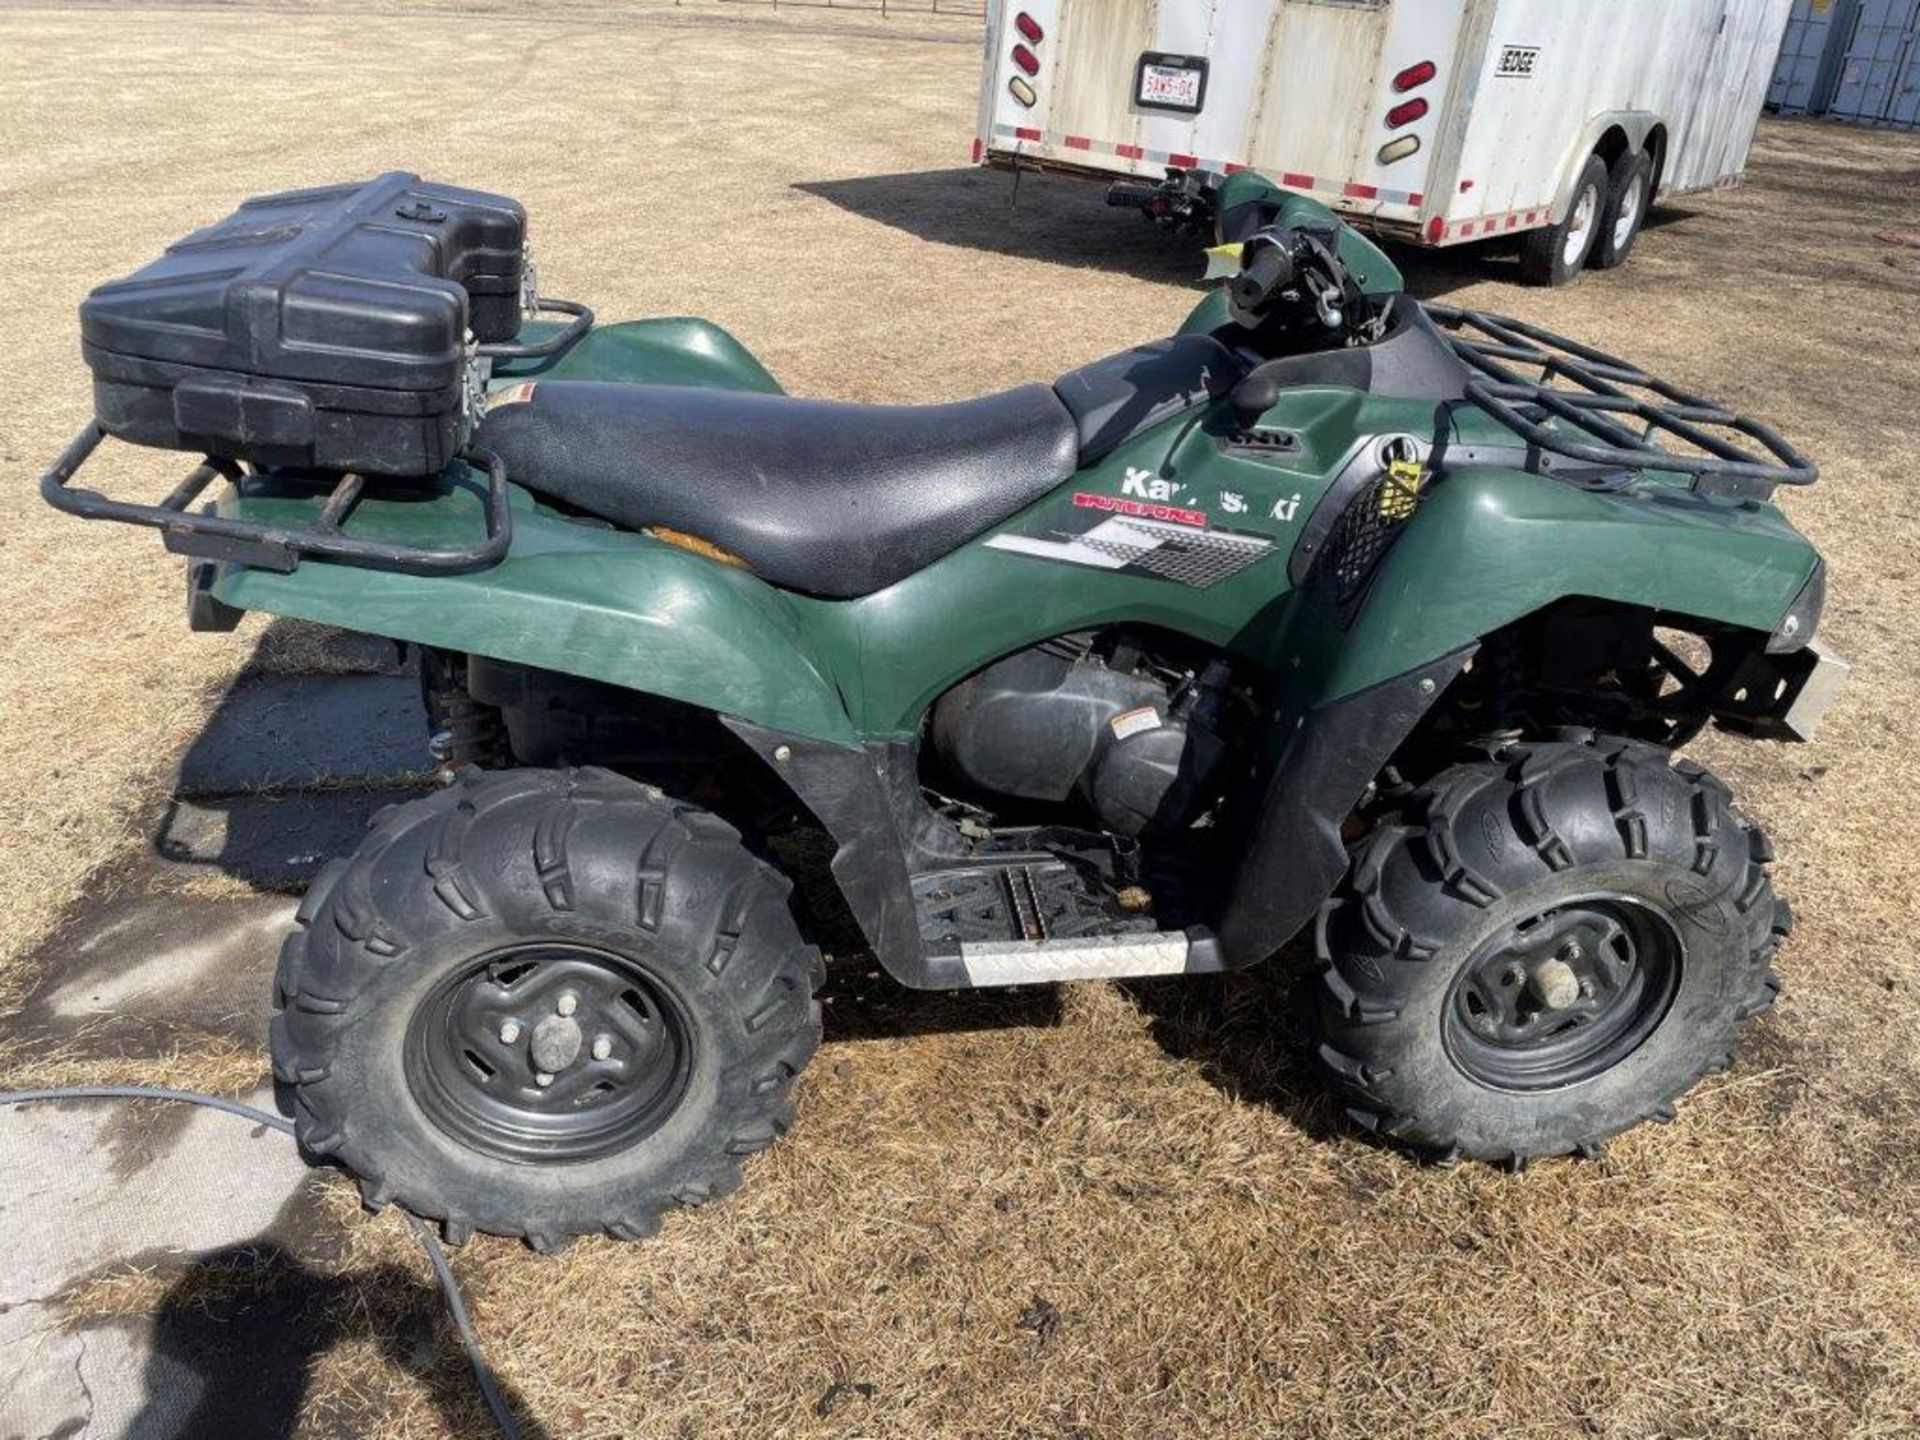 2007 KAWASAKI BRUTE FORCE 750 ATV 4X4 AUTO, RECENT CARB CLEAN, NEW BATTERY, 1762 KM'S SHOWING - Image 5 of 19